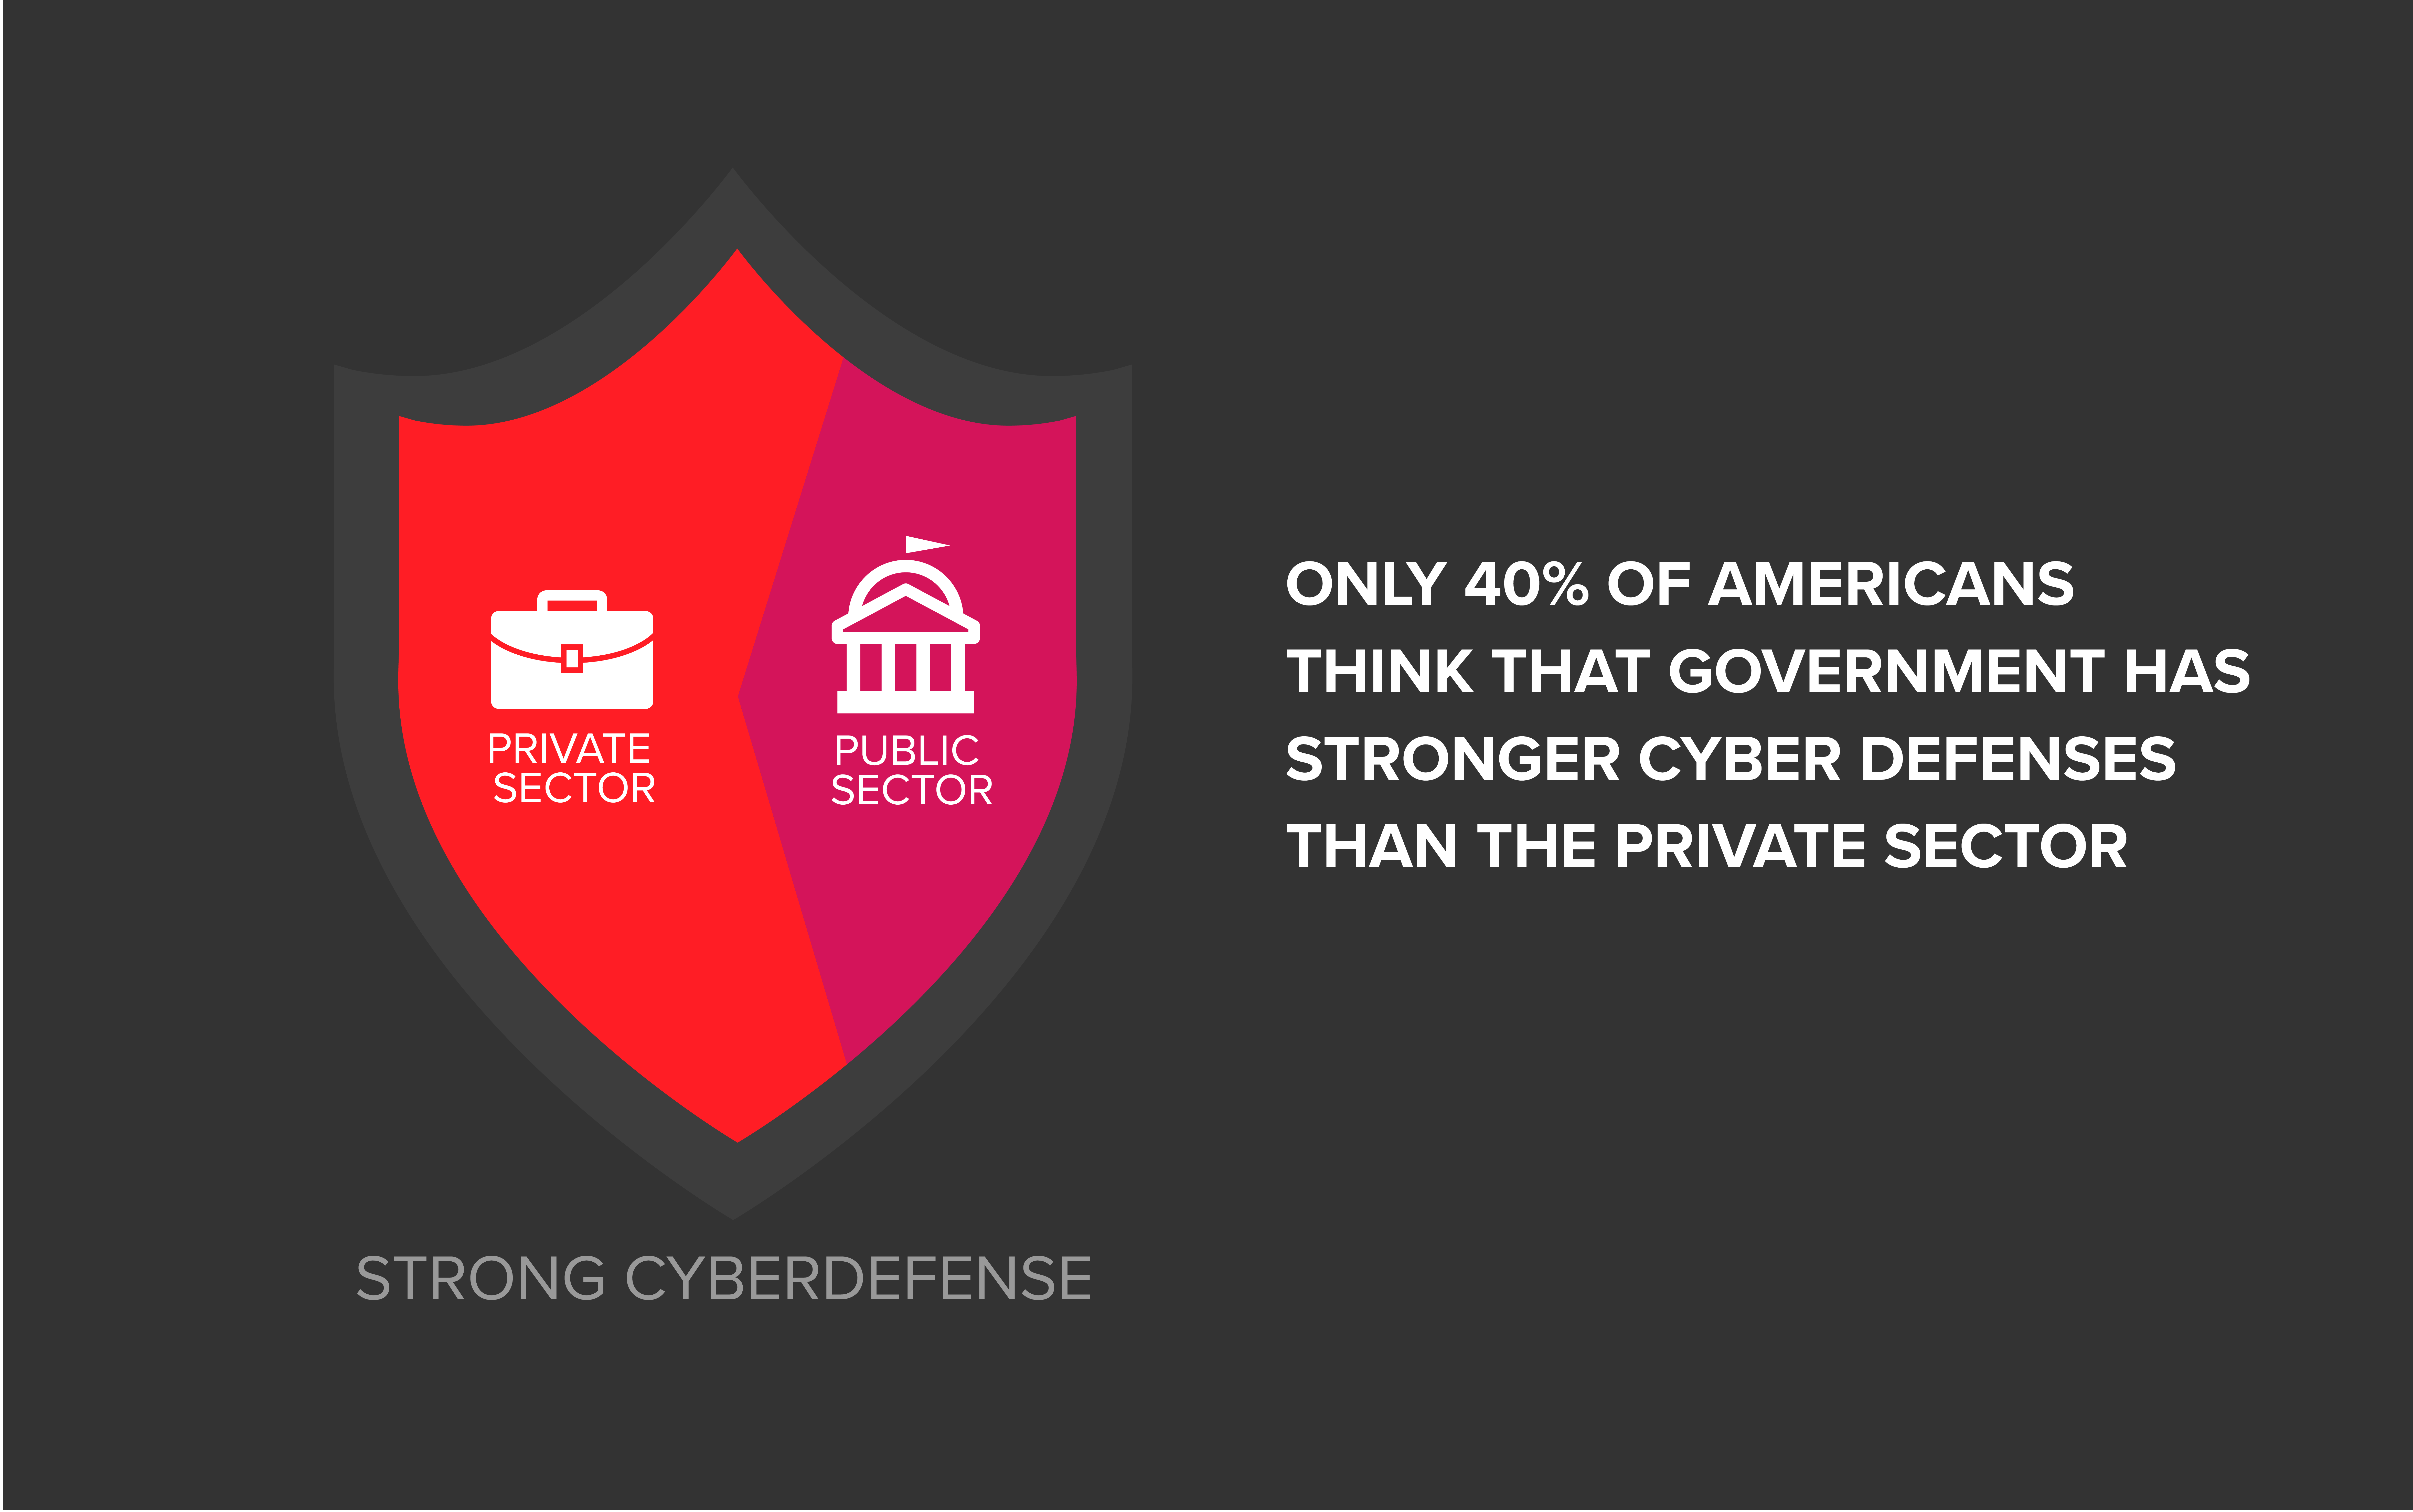 61% of Americans noted that they believe that the private sector has better cybersecurity defenses currently than government does for thwarting state-sponsored cyber attacks